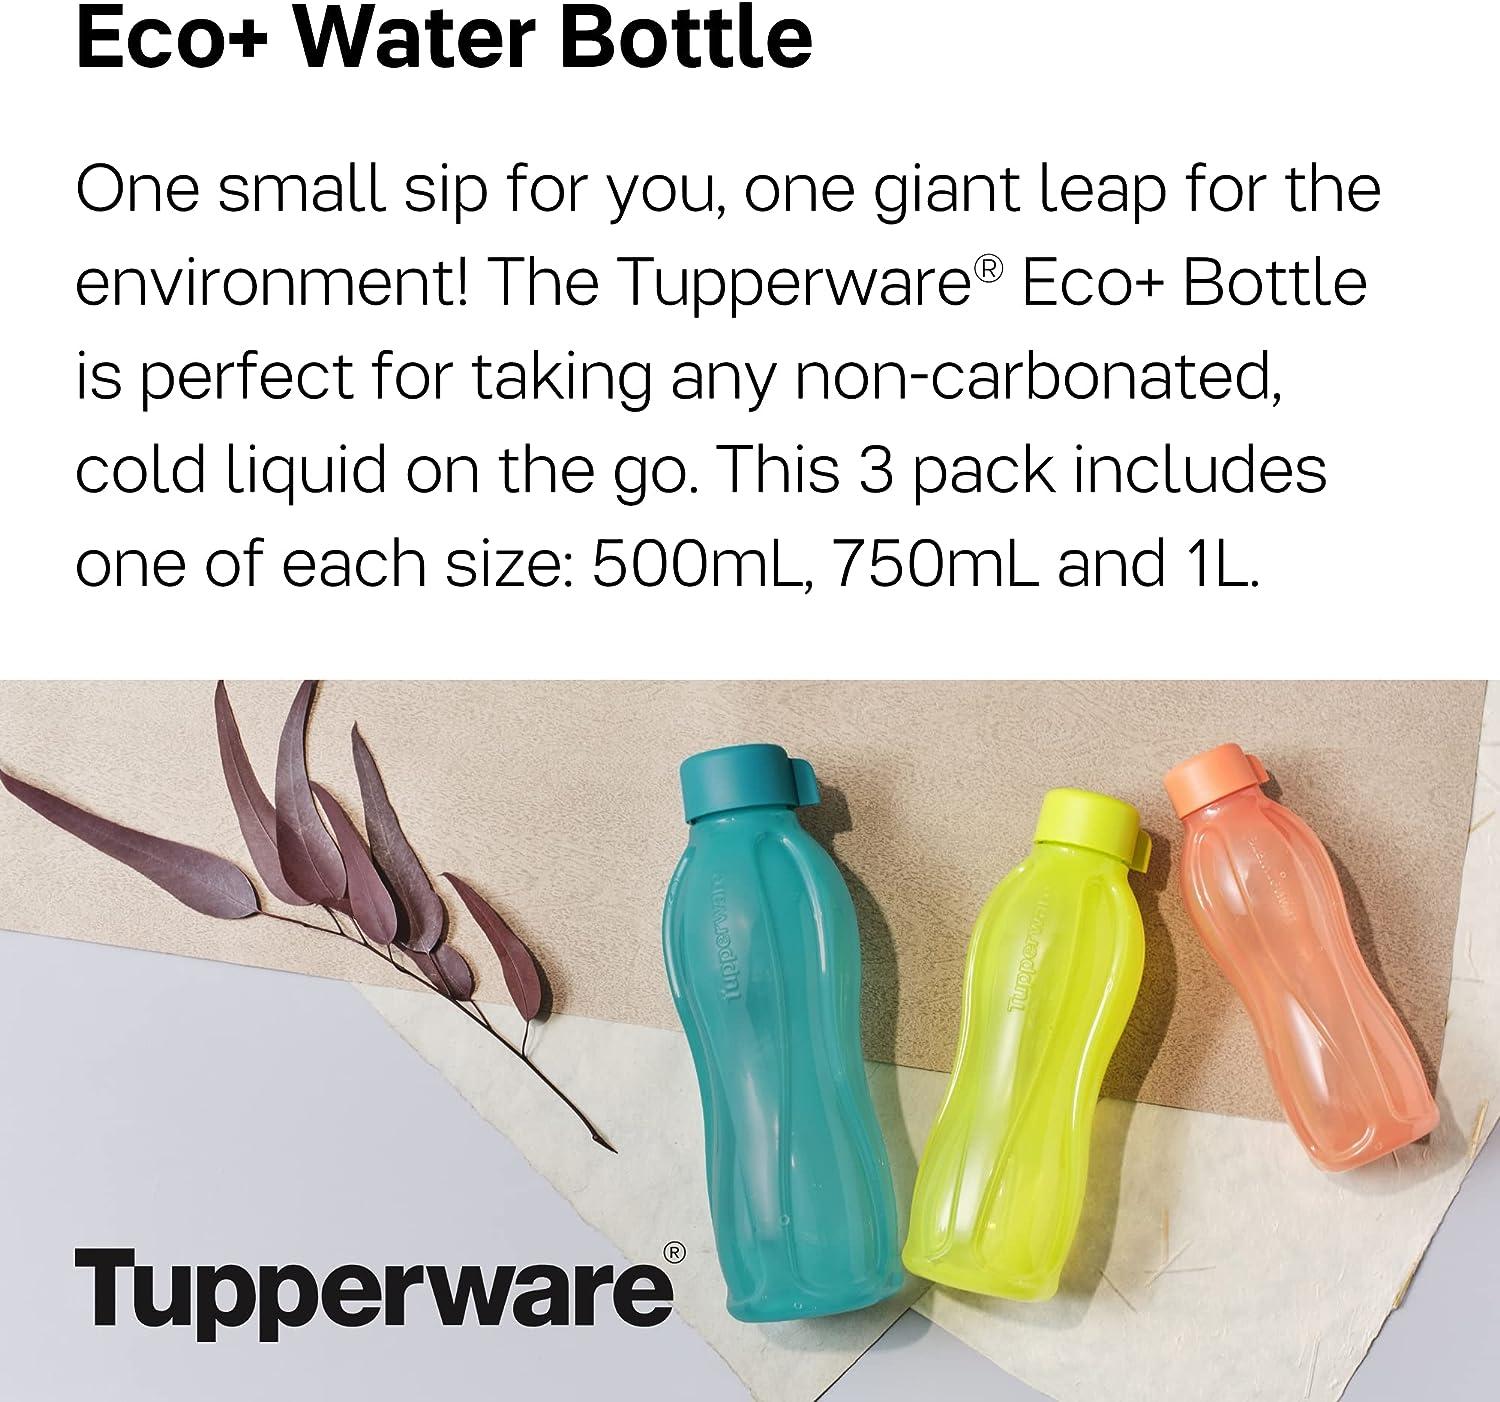 Tupperware U.S. & Canada - Extra Large Eco Water Bottle (only